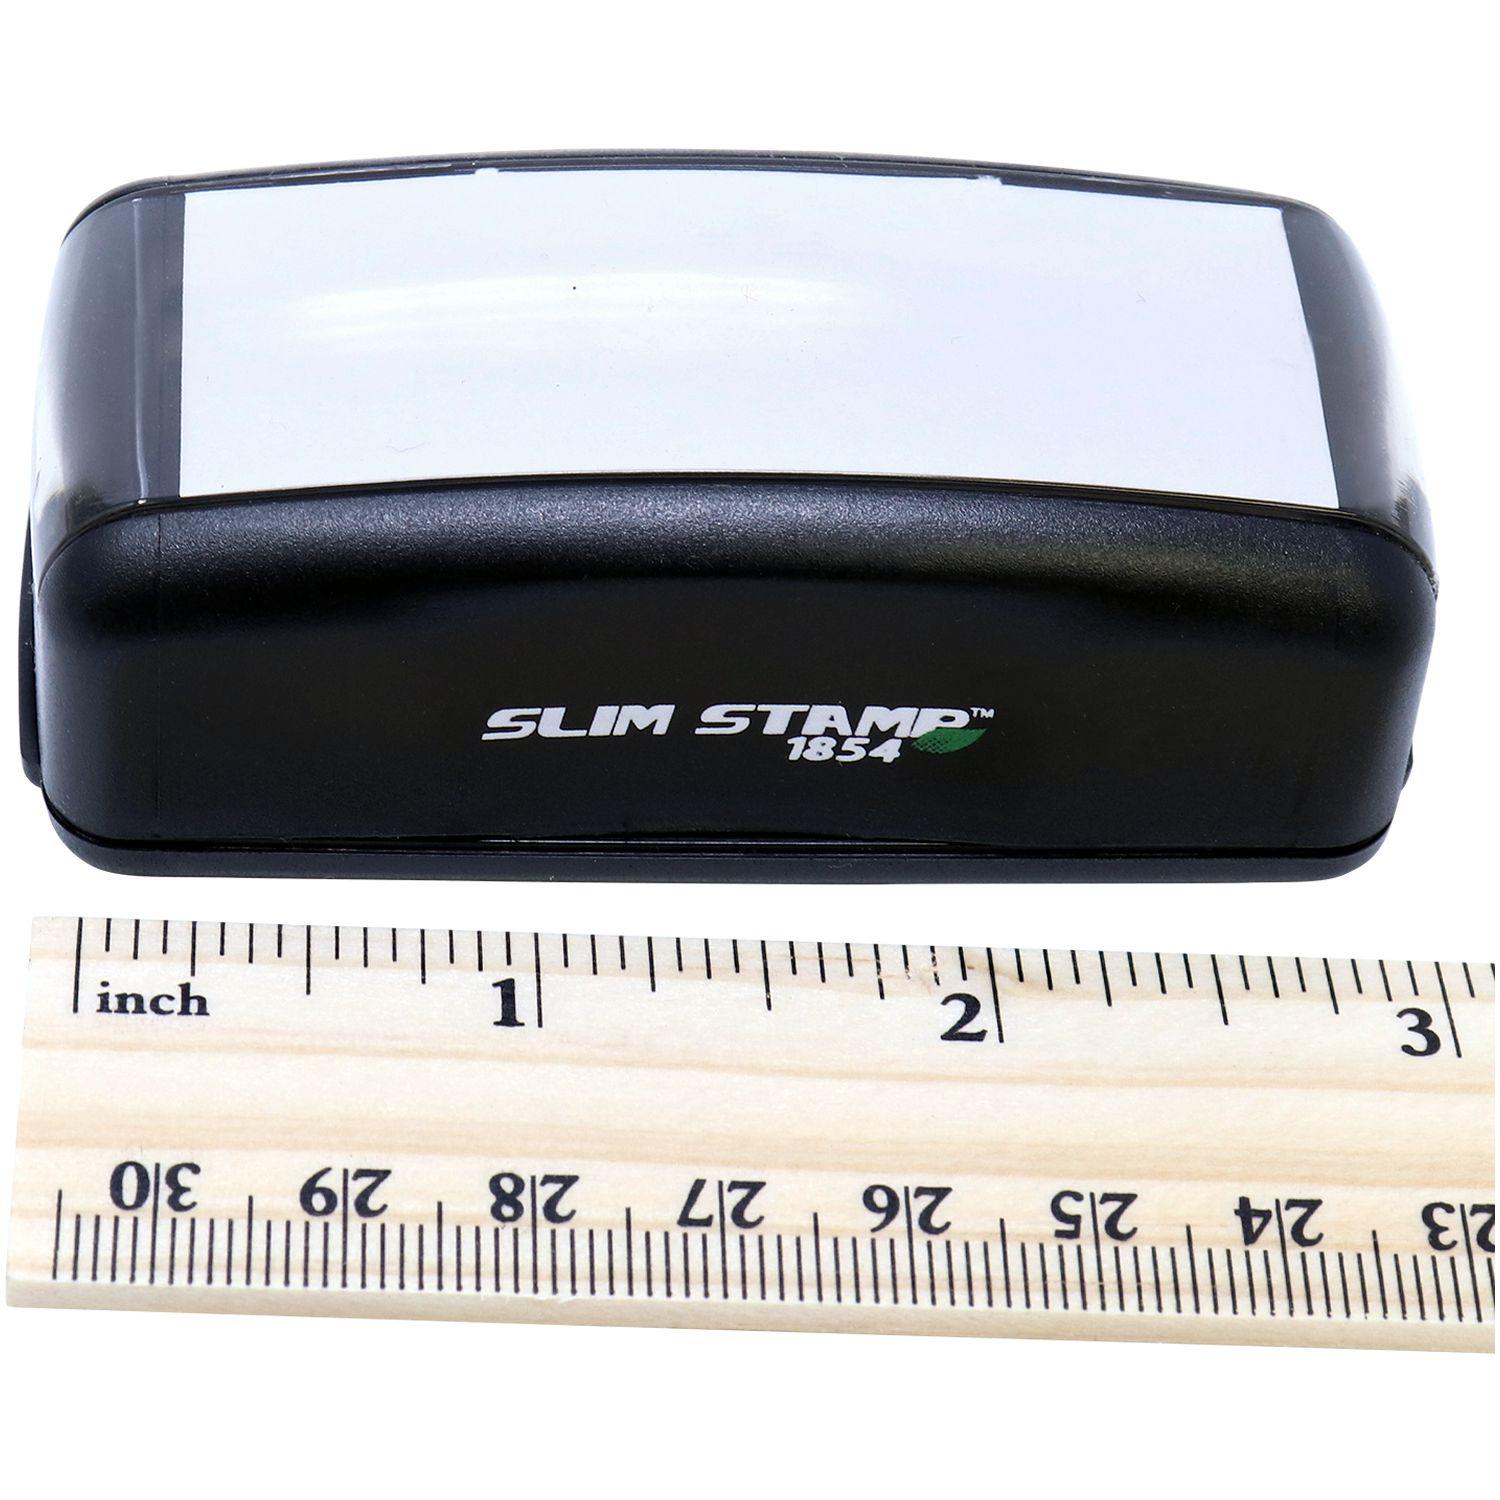 Measurement Large Pre-Inked Client's Copy Stamp with Ruler